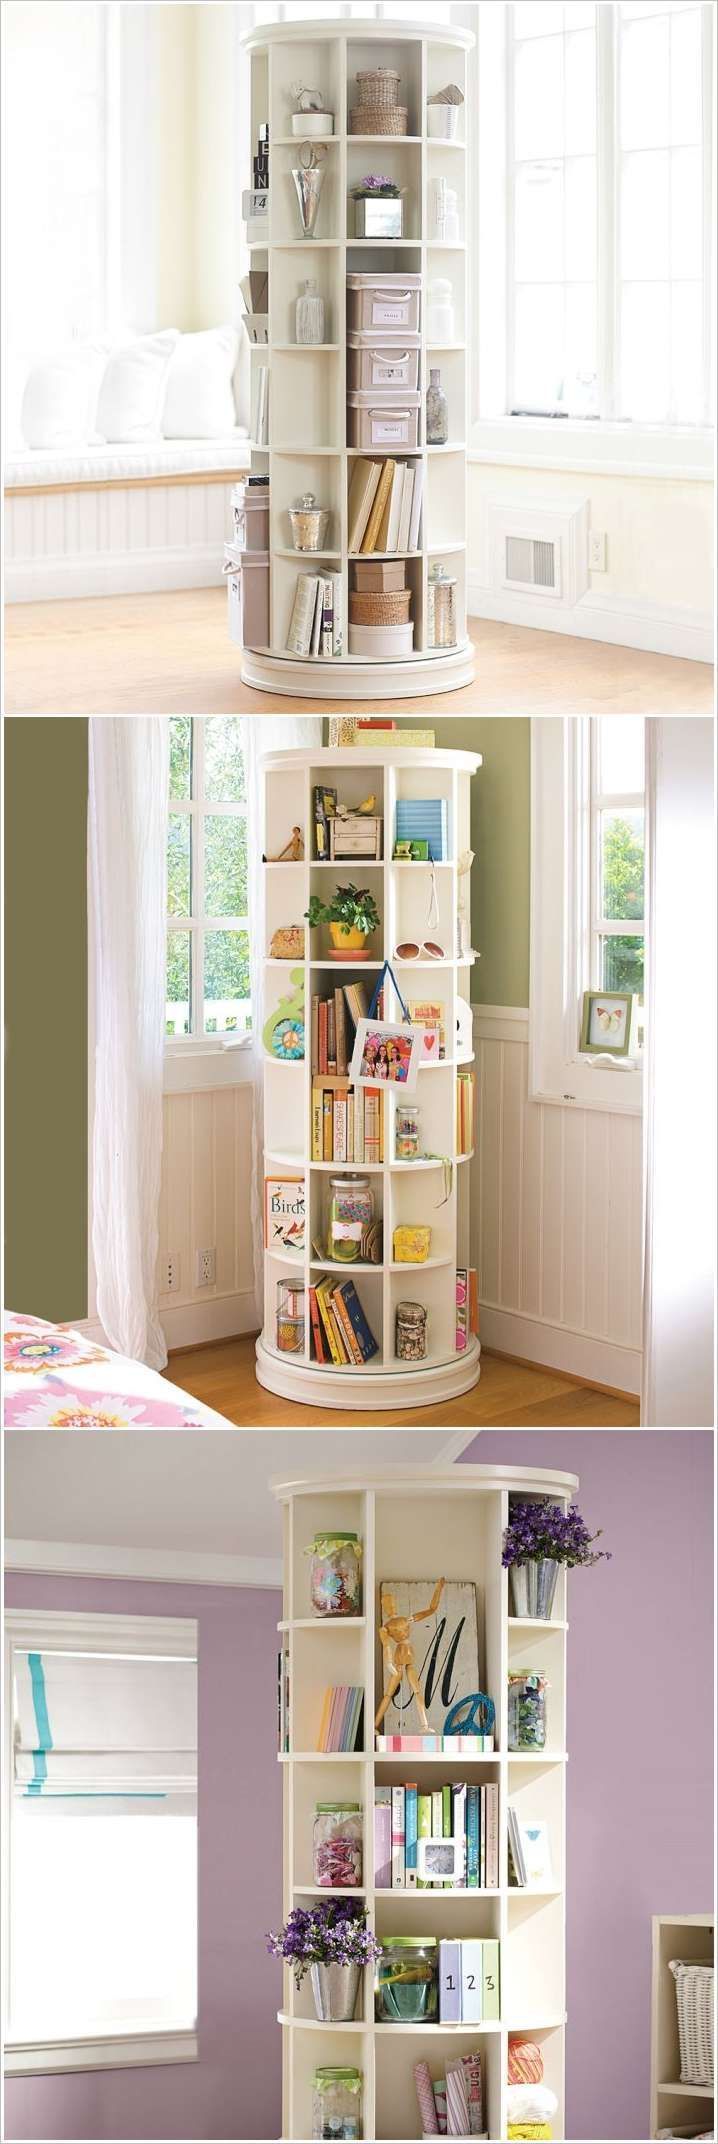 A Revolving Bookcase Loaded with Storage Space…plus more space saving ideas for all areas of the home!